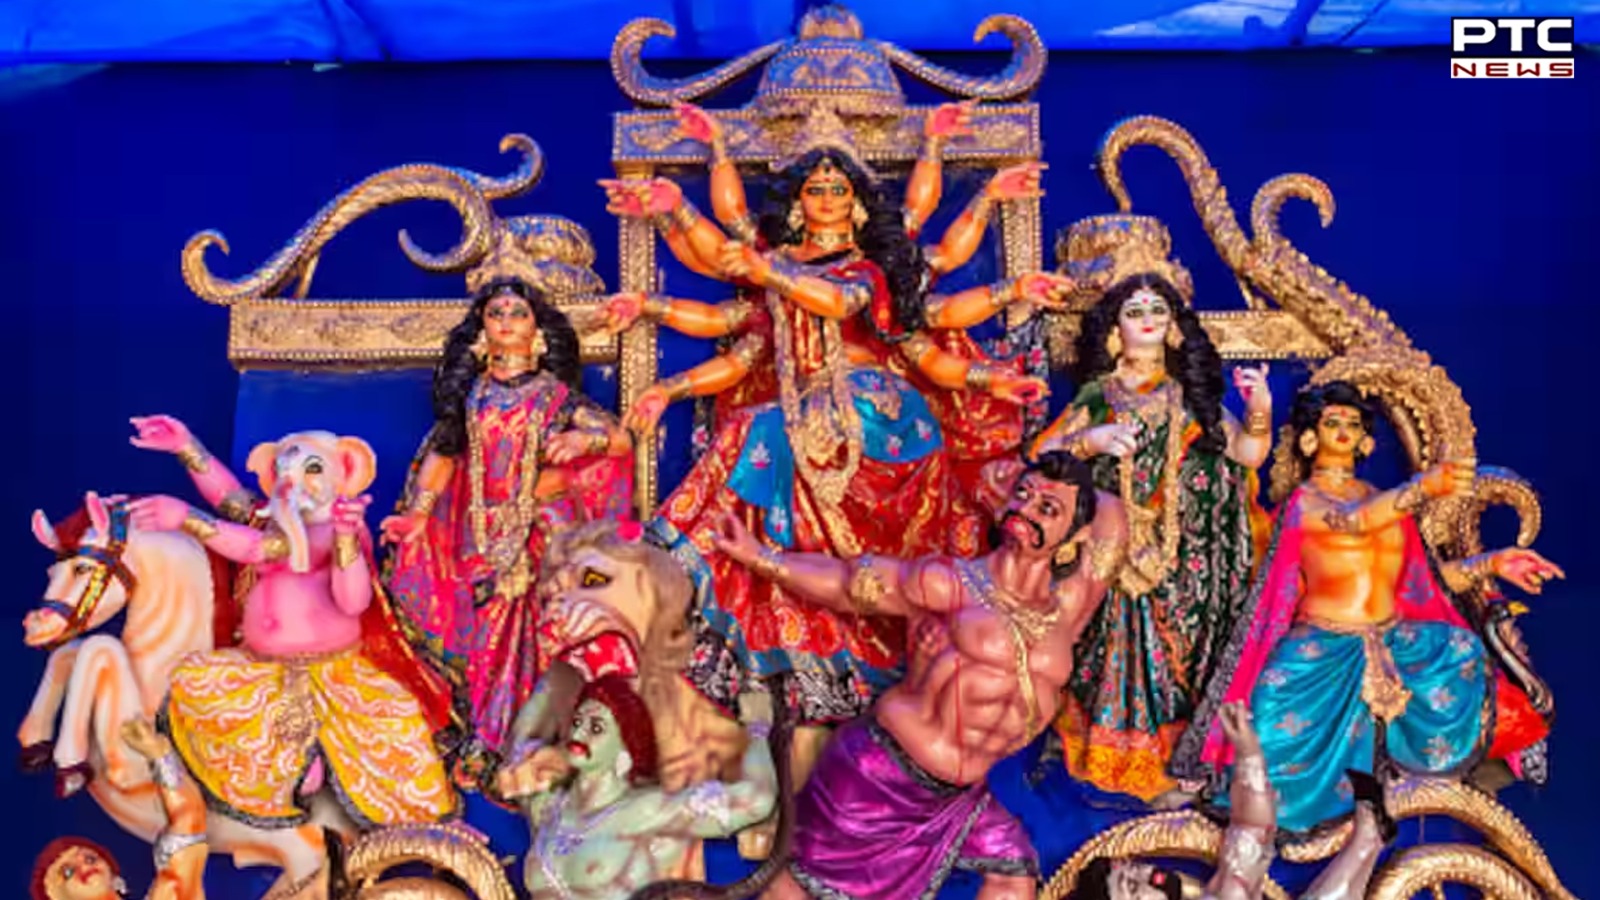 Chaitra Navaratri Day 1: Devotees throng temples nationwide for goddess Durga blessings